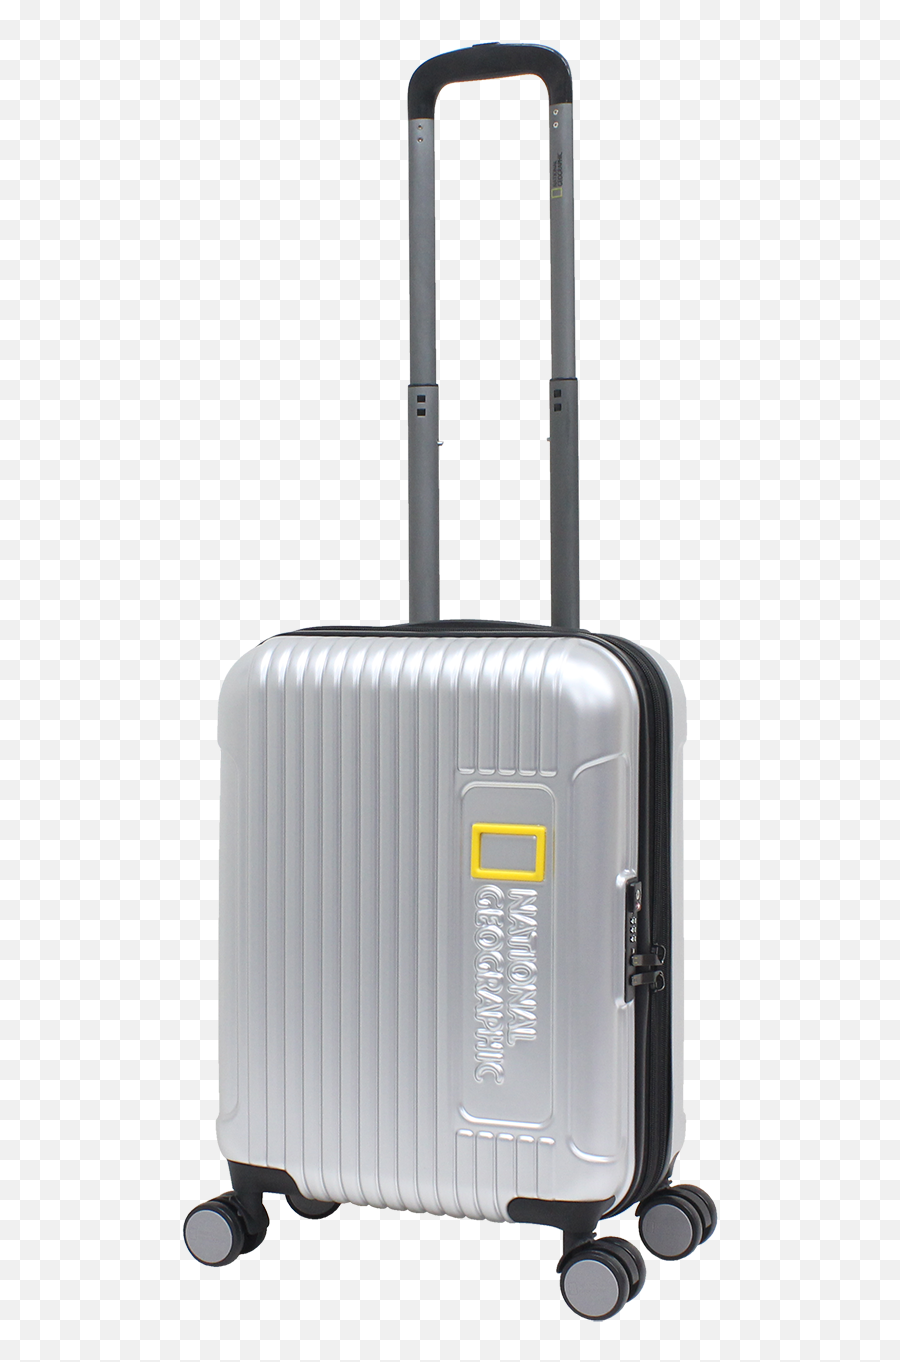 National Geographic Canyon Pc - Abs Luggage Silver National Geographic Canyon Luggage Png,National Geographic Logo Png